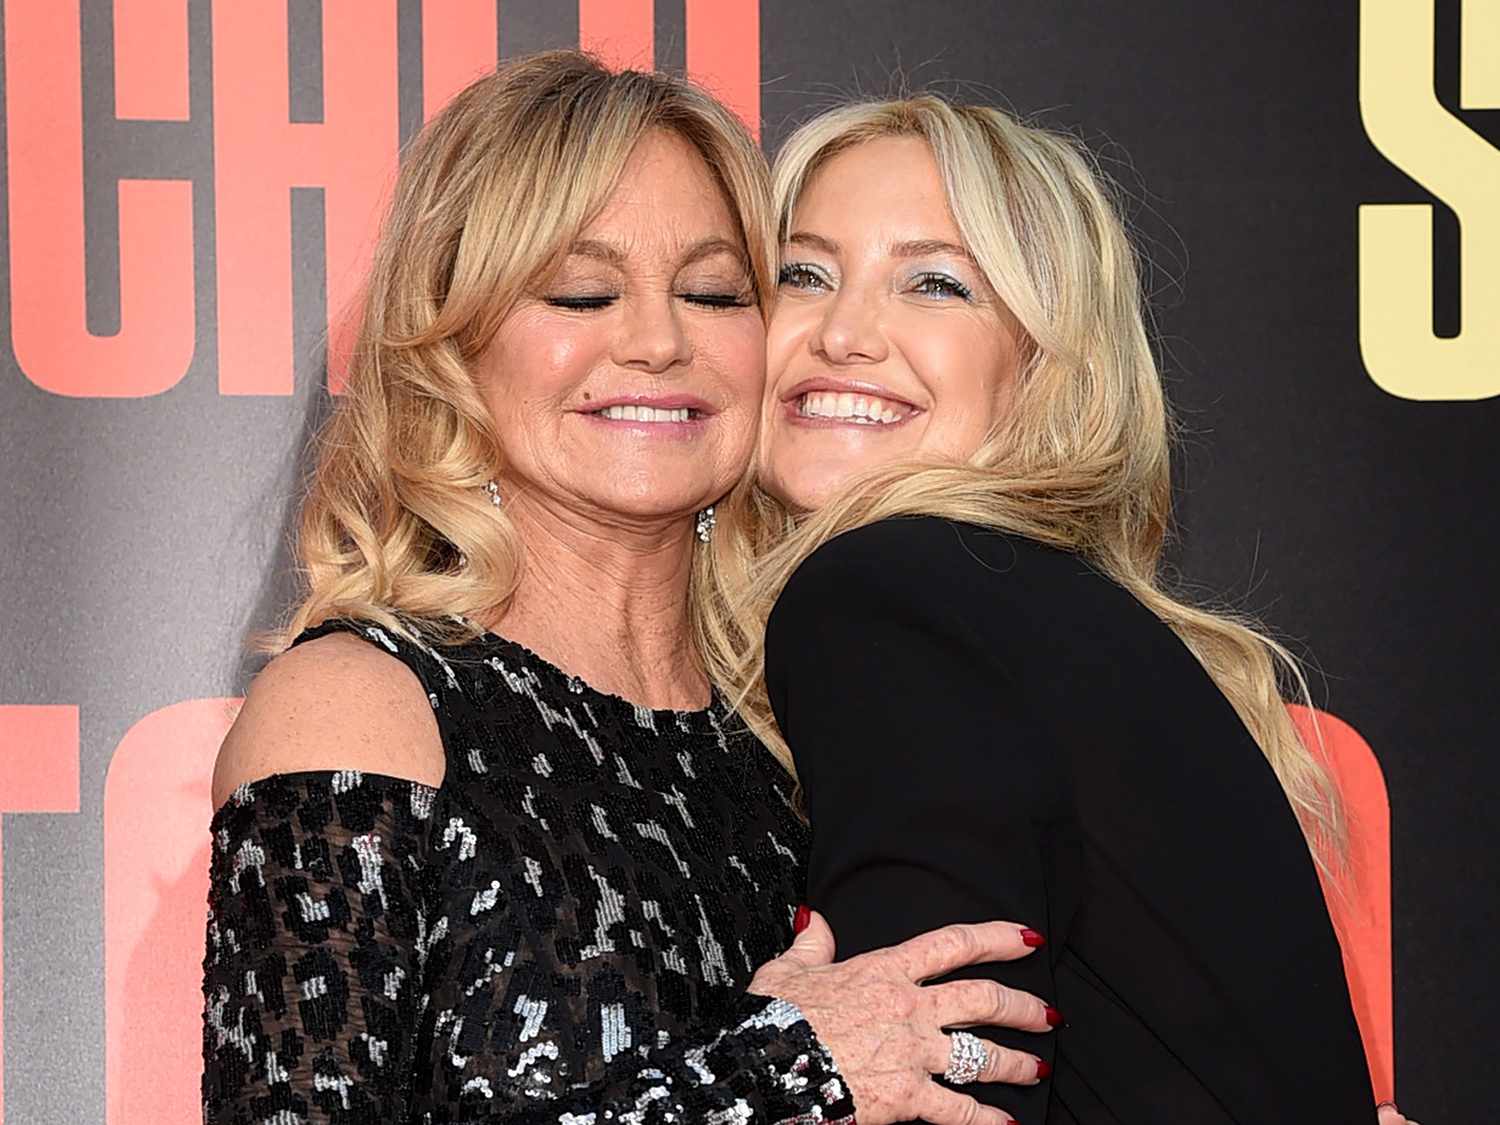 Goldie Hawn (L) and her daughter Kate Hudson arrive at the premiere of 20th Century Fox's "Snatched" at the Village Theatre on May 10, 2017 in Los Angeles, California